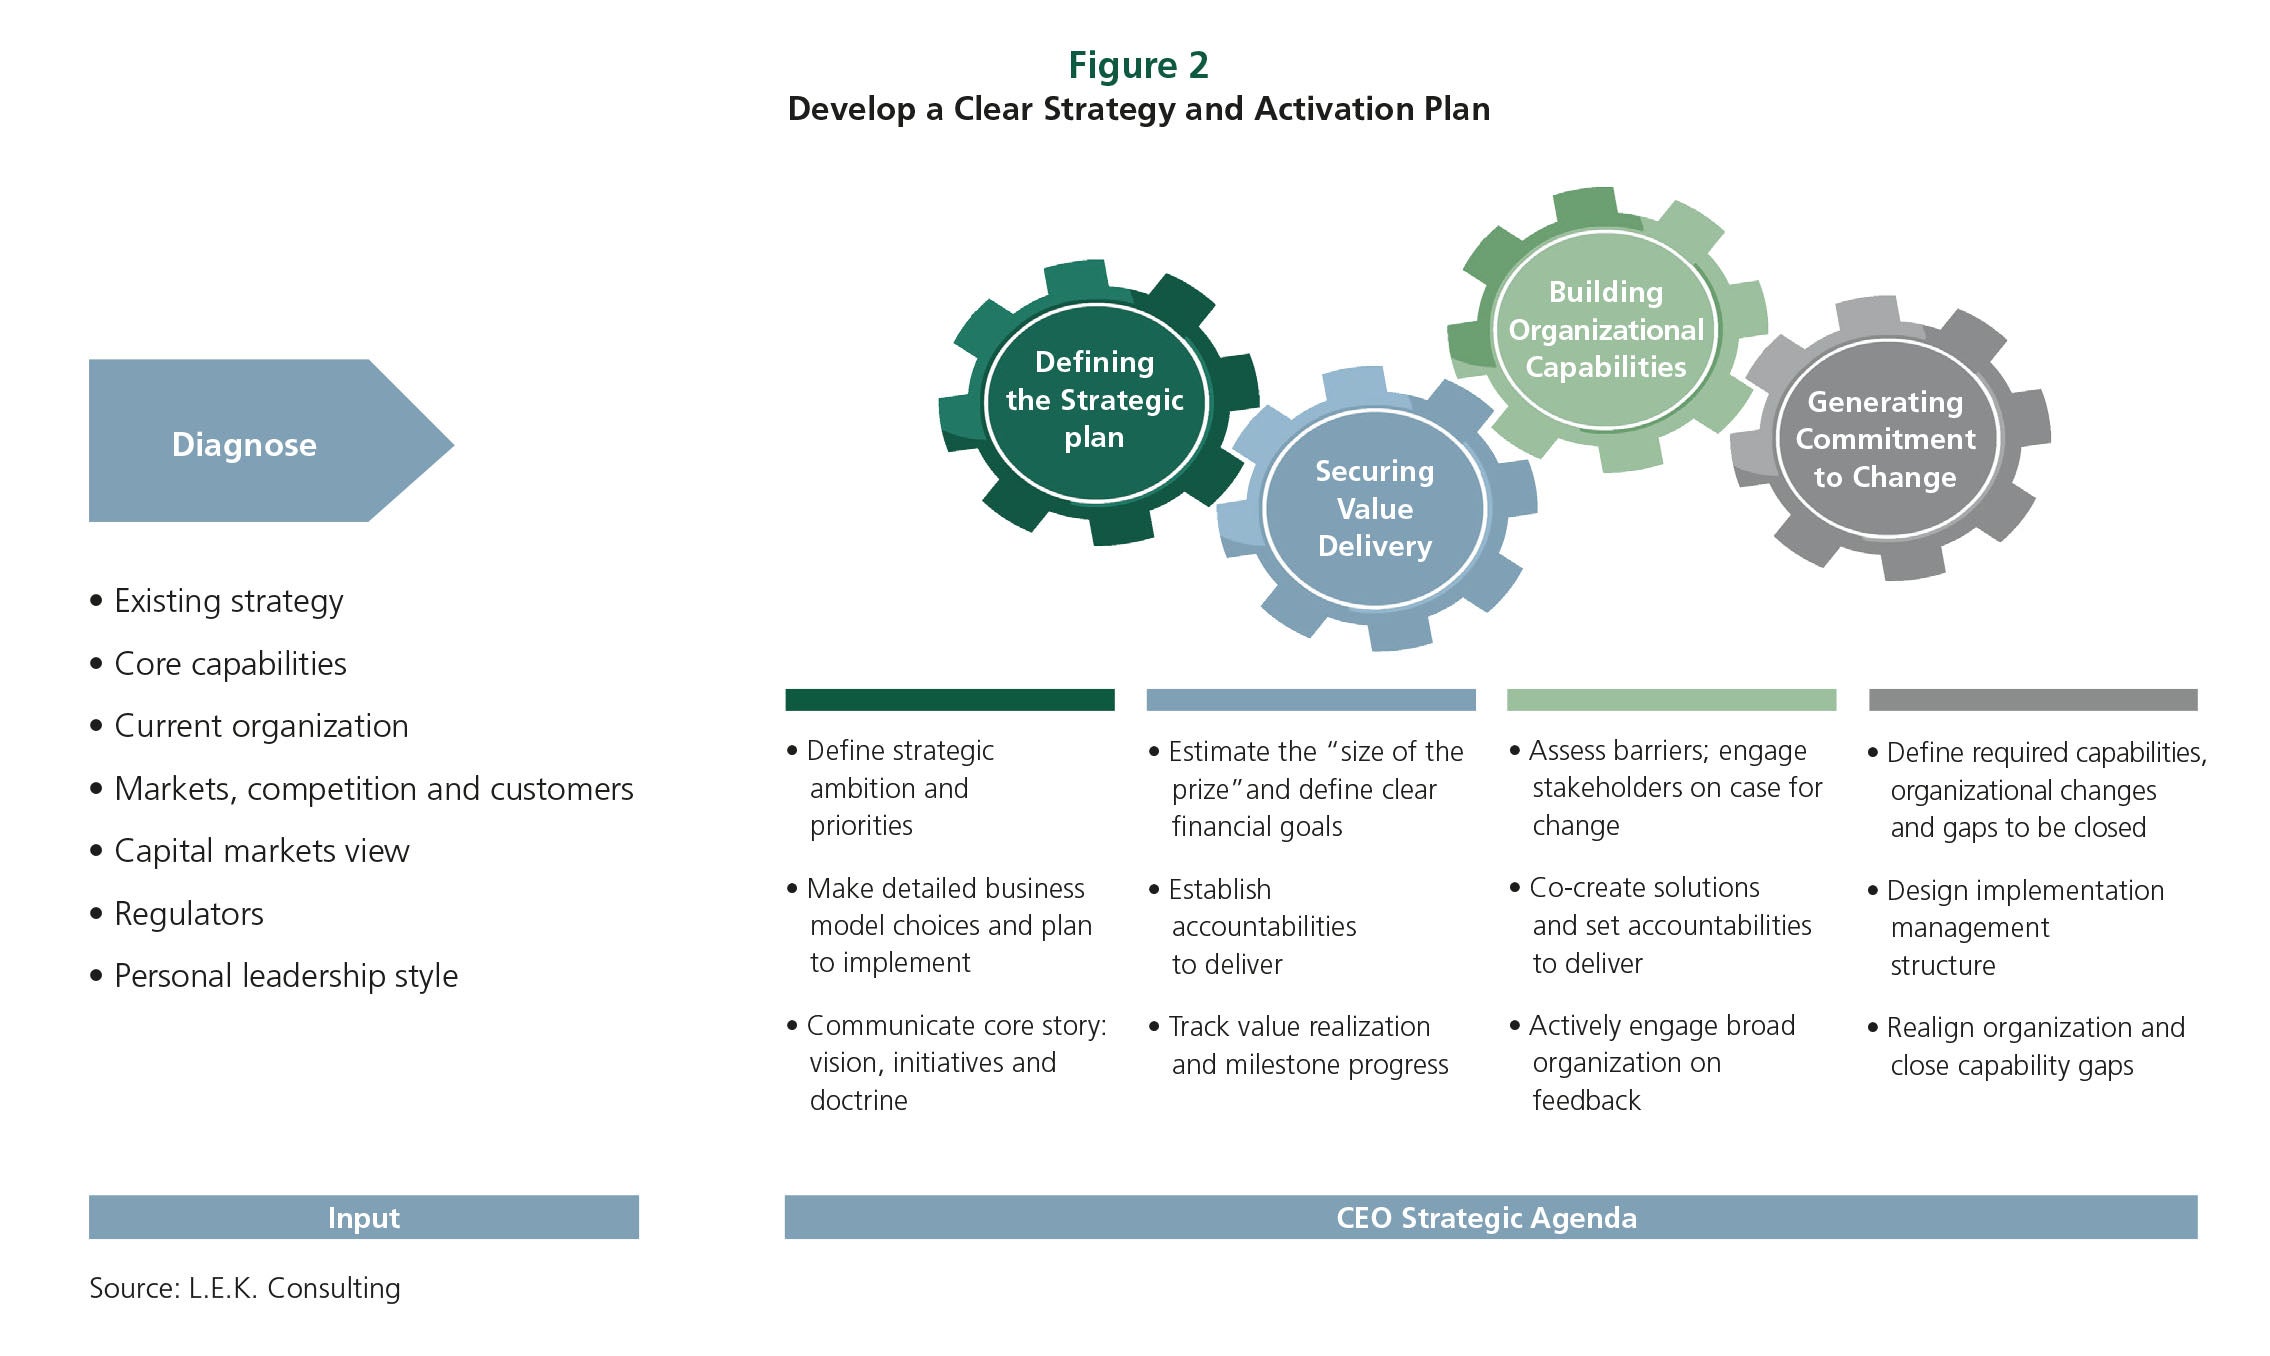 Develop a clear strategy and activation plan